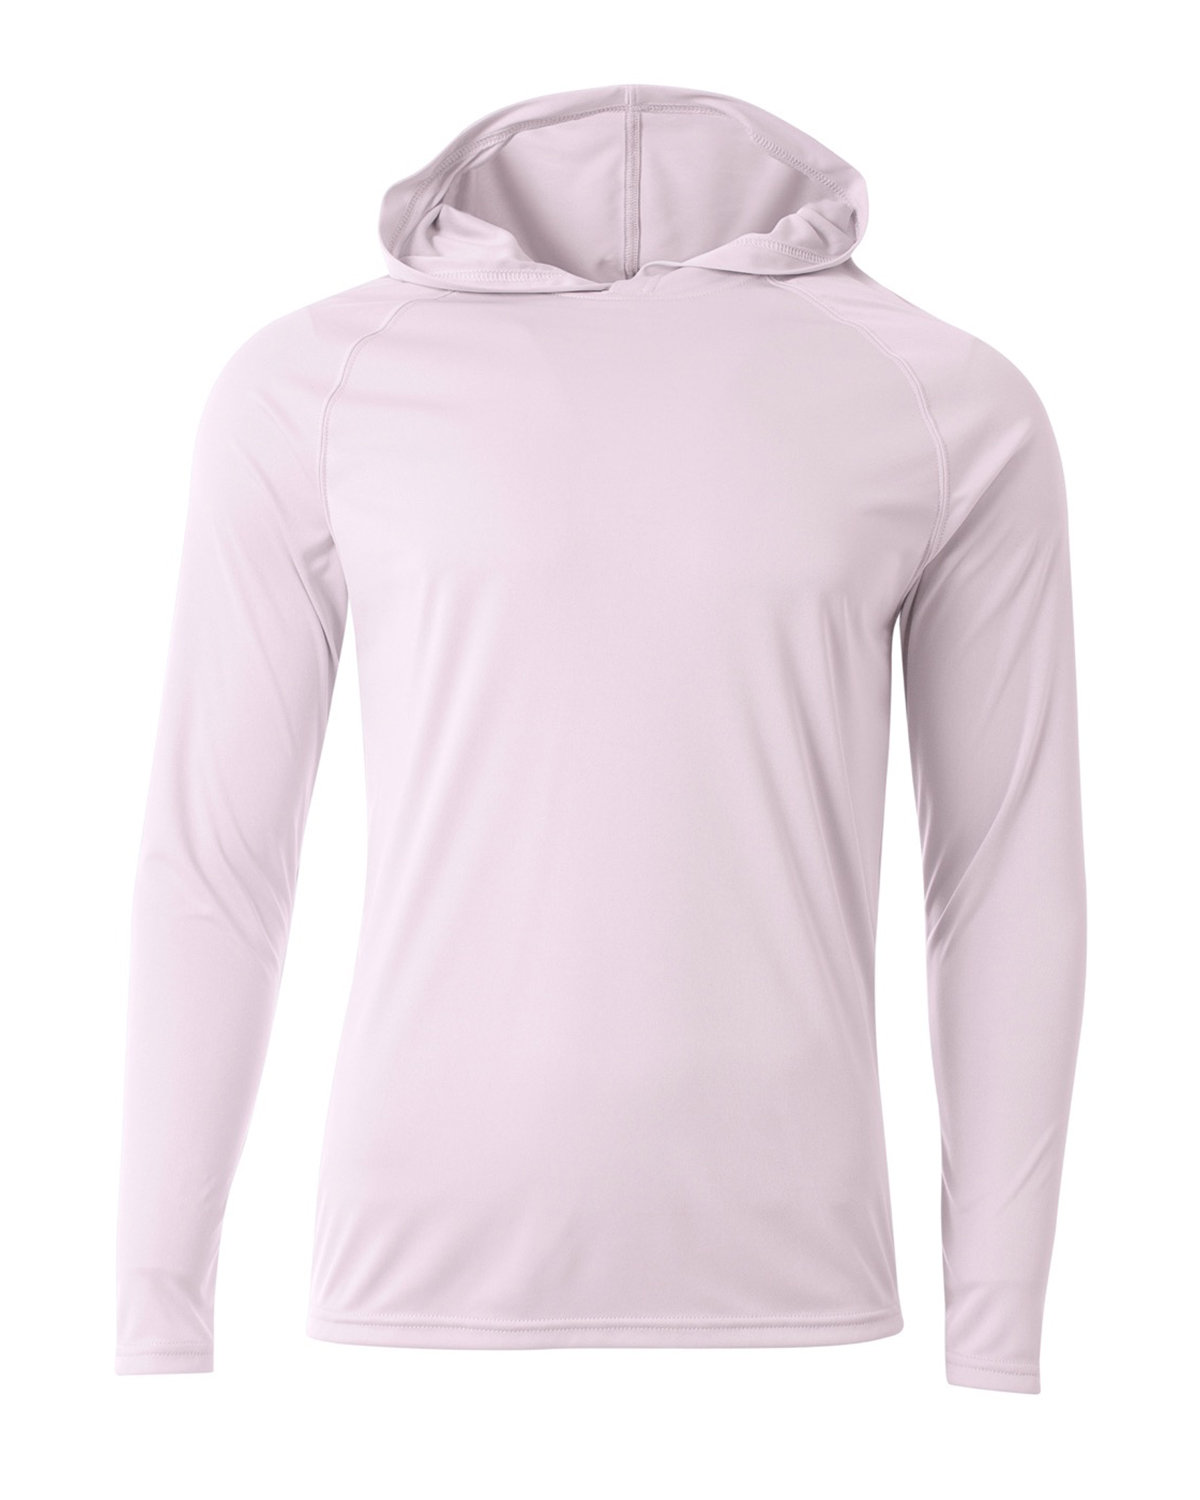 Buy Mens Cooling Performance Long-Sleeve Hooded T-Shirt - A4 Online at ...